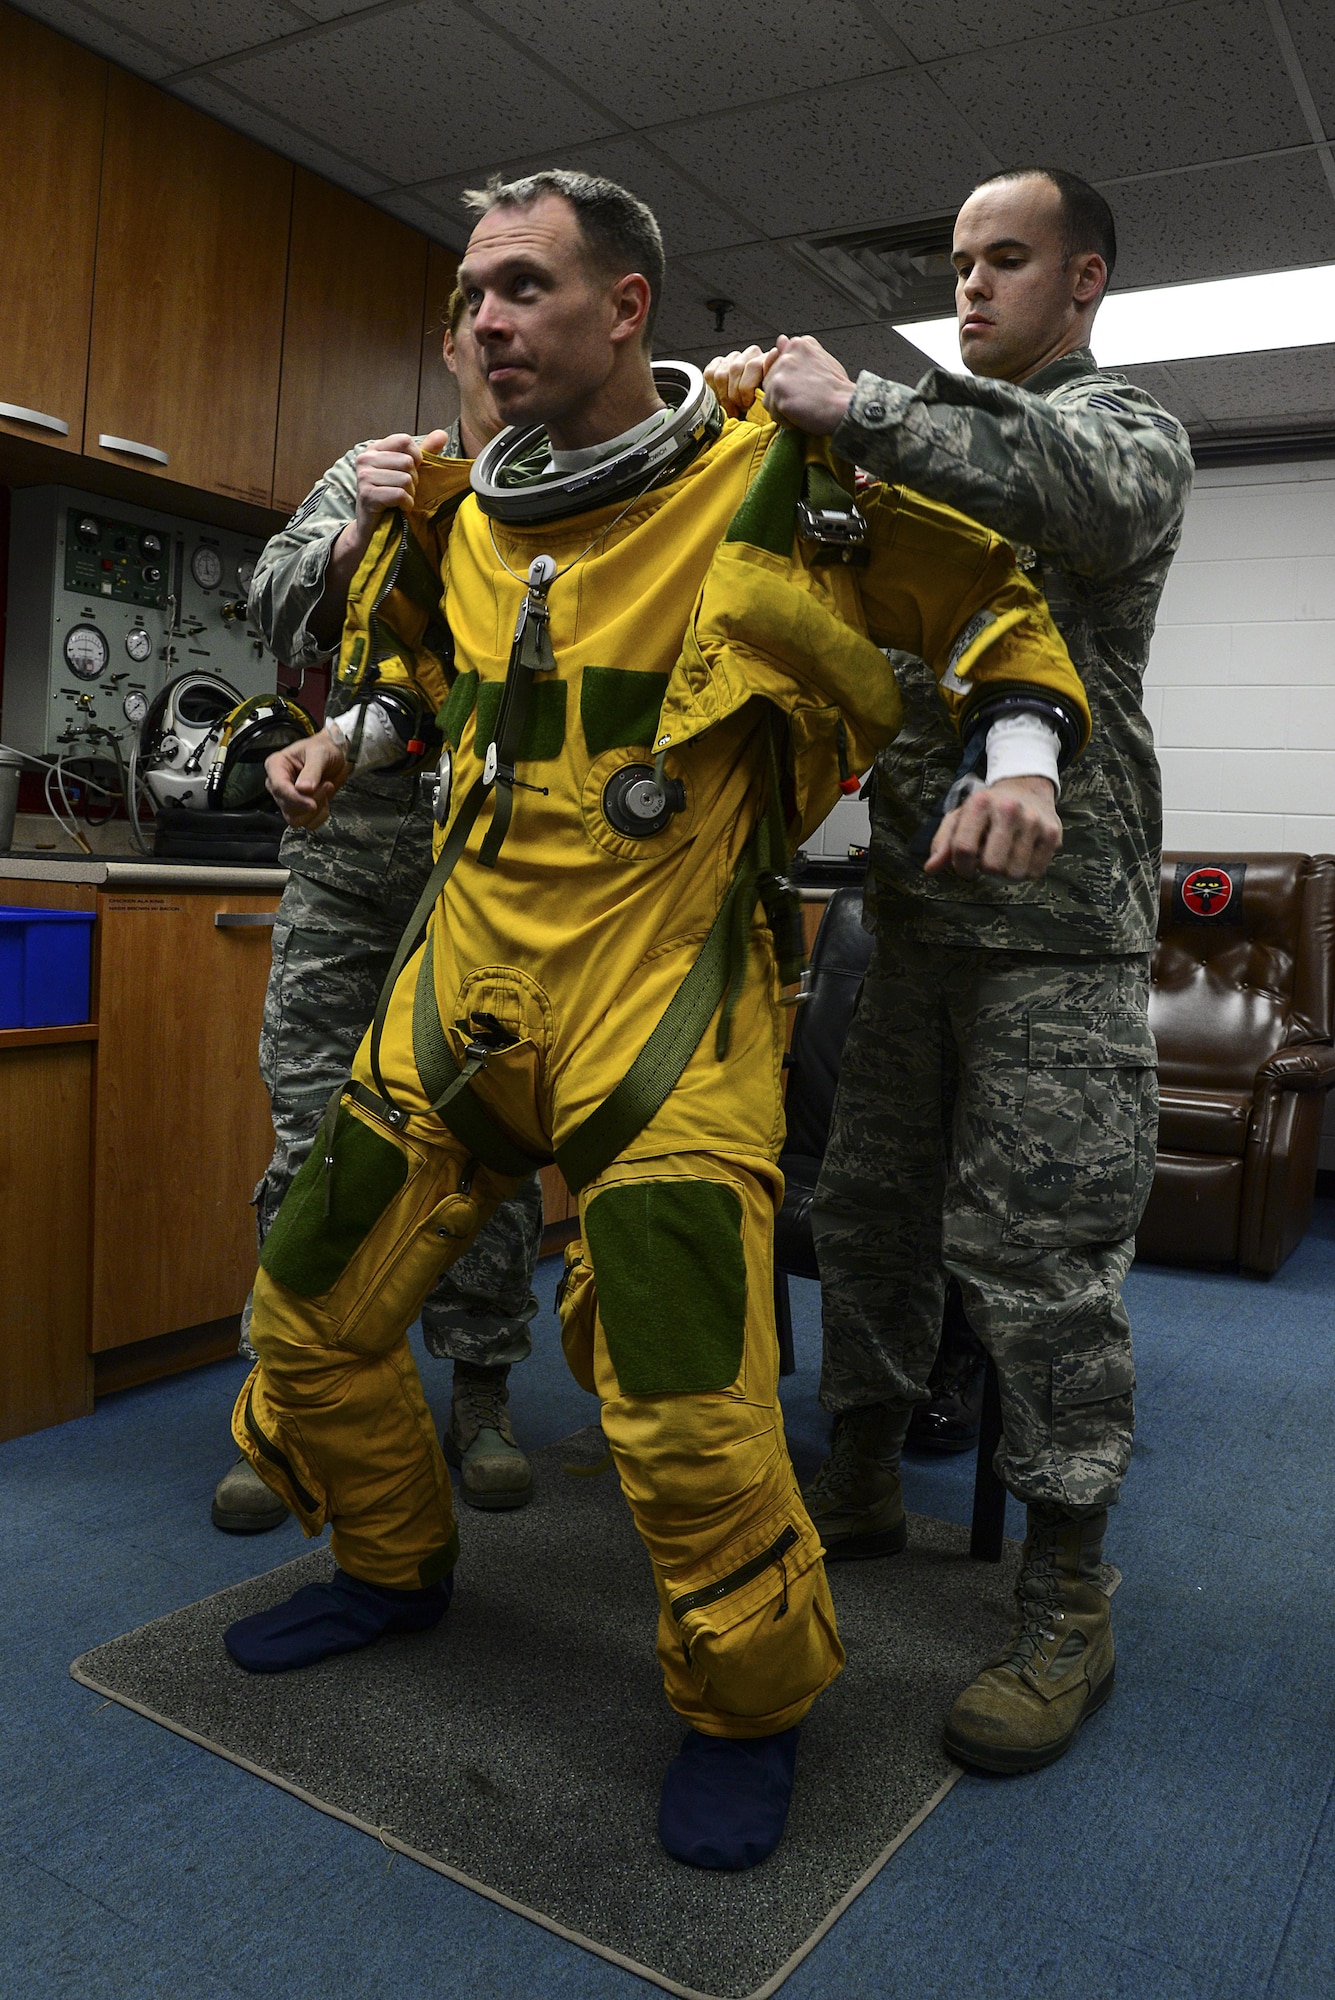 Staff Sgts. Stacy Klein and Staff Sgt. Joseph Kennedy, 5th Reconnaissance Squadron physiological technicians, assist Lt. Col. Luke Lokowich, the 5th RS commander and a U-2 pilot, with his high-altitude pressure suit April 22, 2015, at Osan Air Base, South Korea. A pressure suit is a protective suit worn by pilots who may fly at altitudes where the air pressure is too low for an unprotected person to survive. (U.S. Air Force photo/Senior Airman Matthew Lancaster)